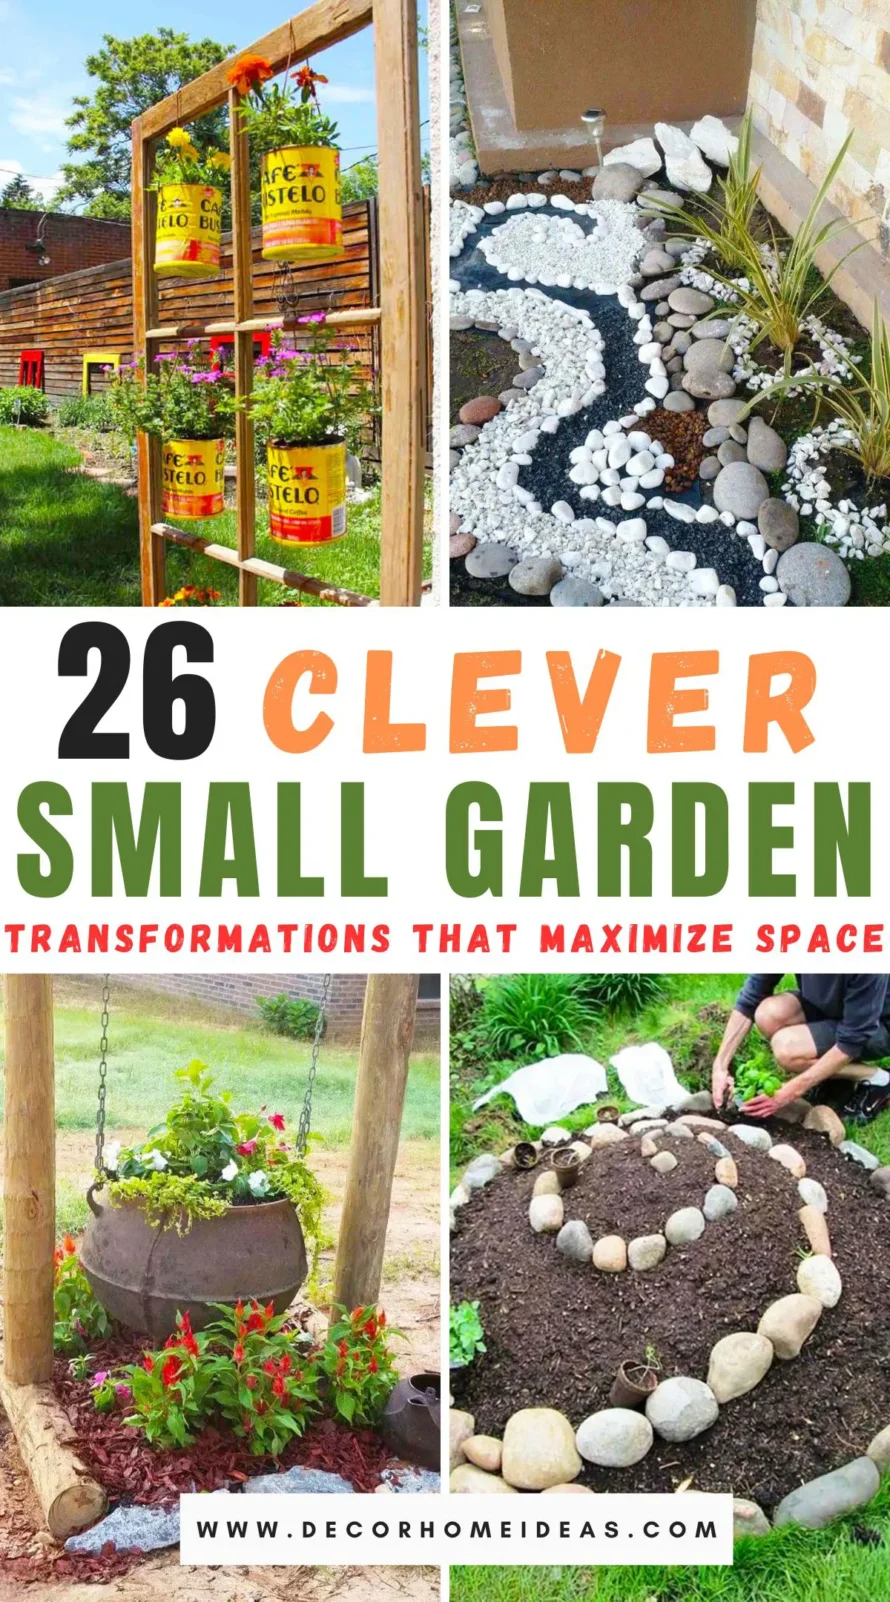 Explore 26 clever strategies to maximize your small garden space and create a lush paradise. Learn practical tips for vertical gardening, compact furniture, and strategic planting to turn limited space into a green haven.